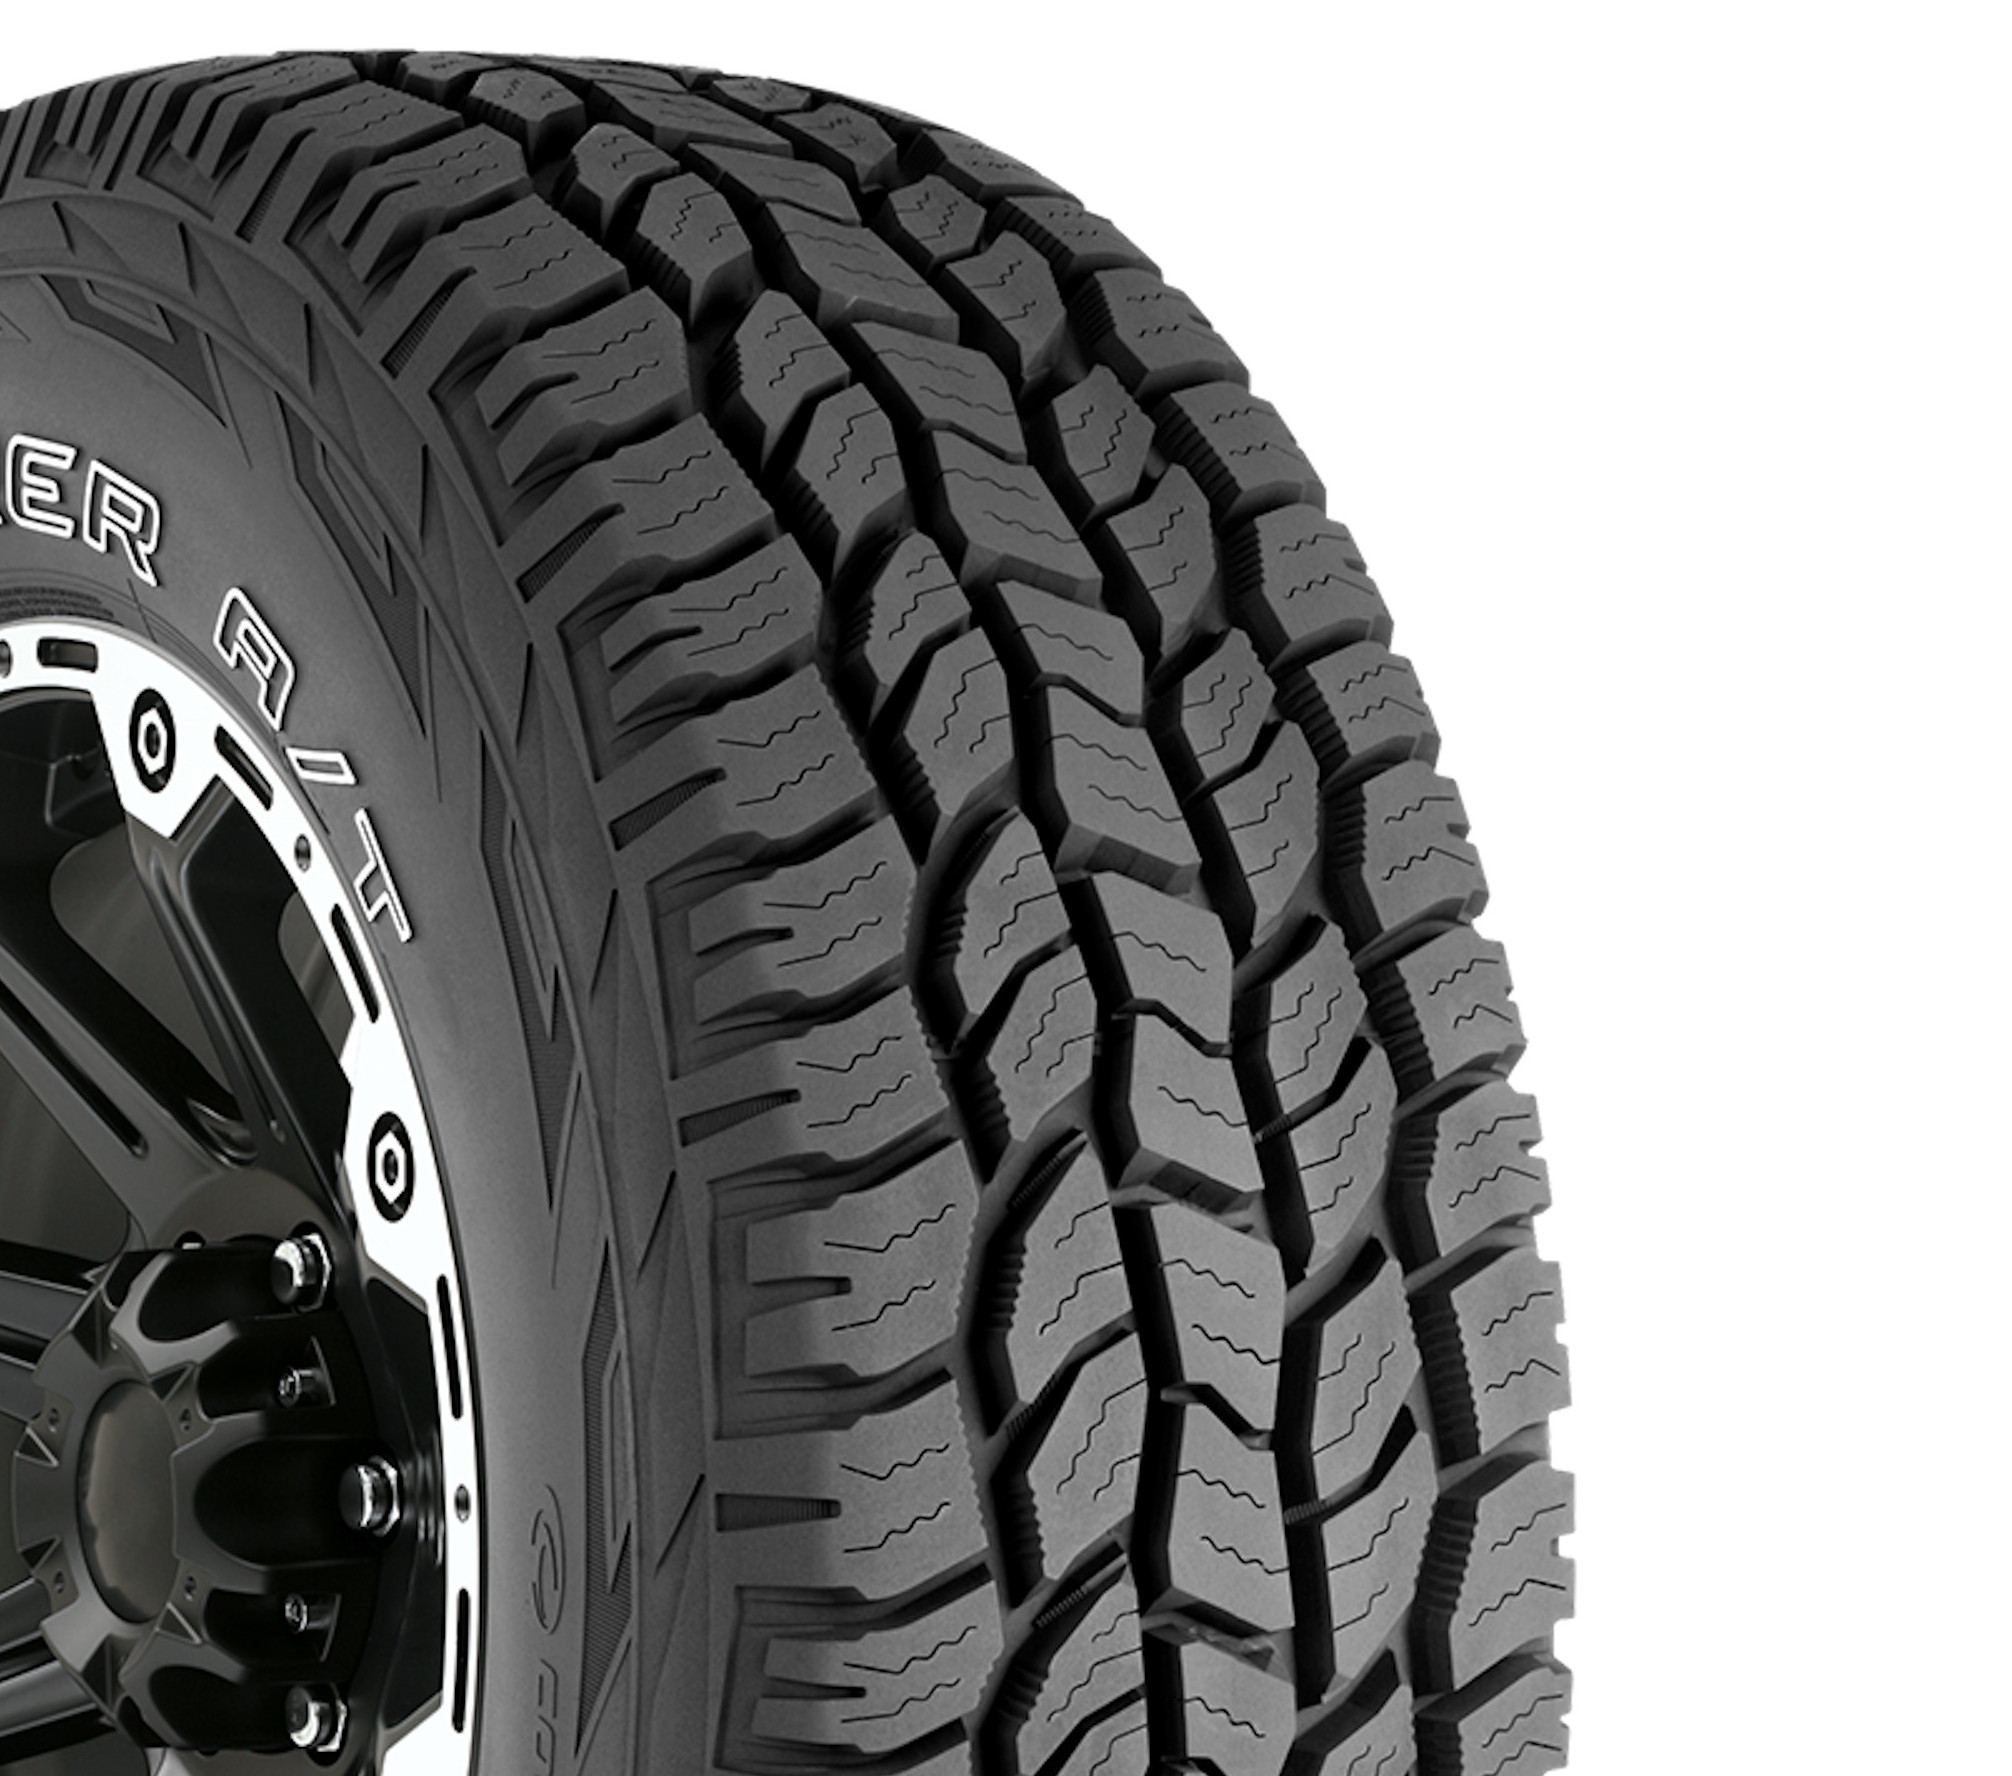 Cooper Discoverer A/T All-Season 275/55R20 117T Tire Fits: 2014-18 Chevrolet Silverado 1500 High Country, 2011-18 GMC Sierra 1500 Denali - image 6 of 8